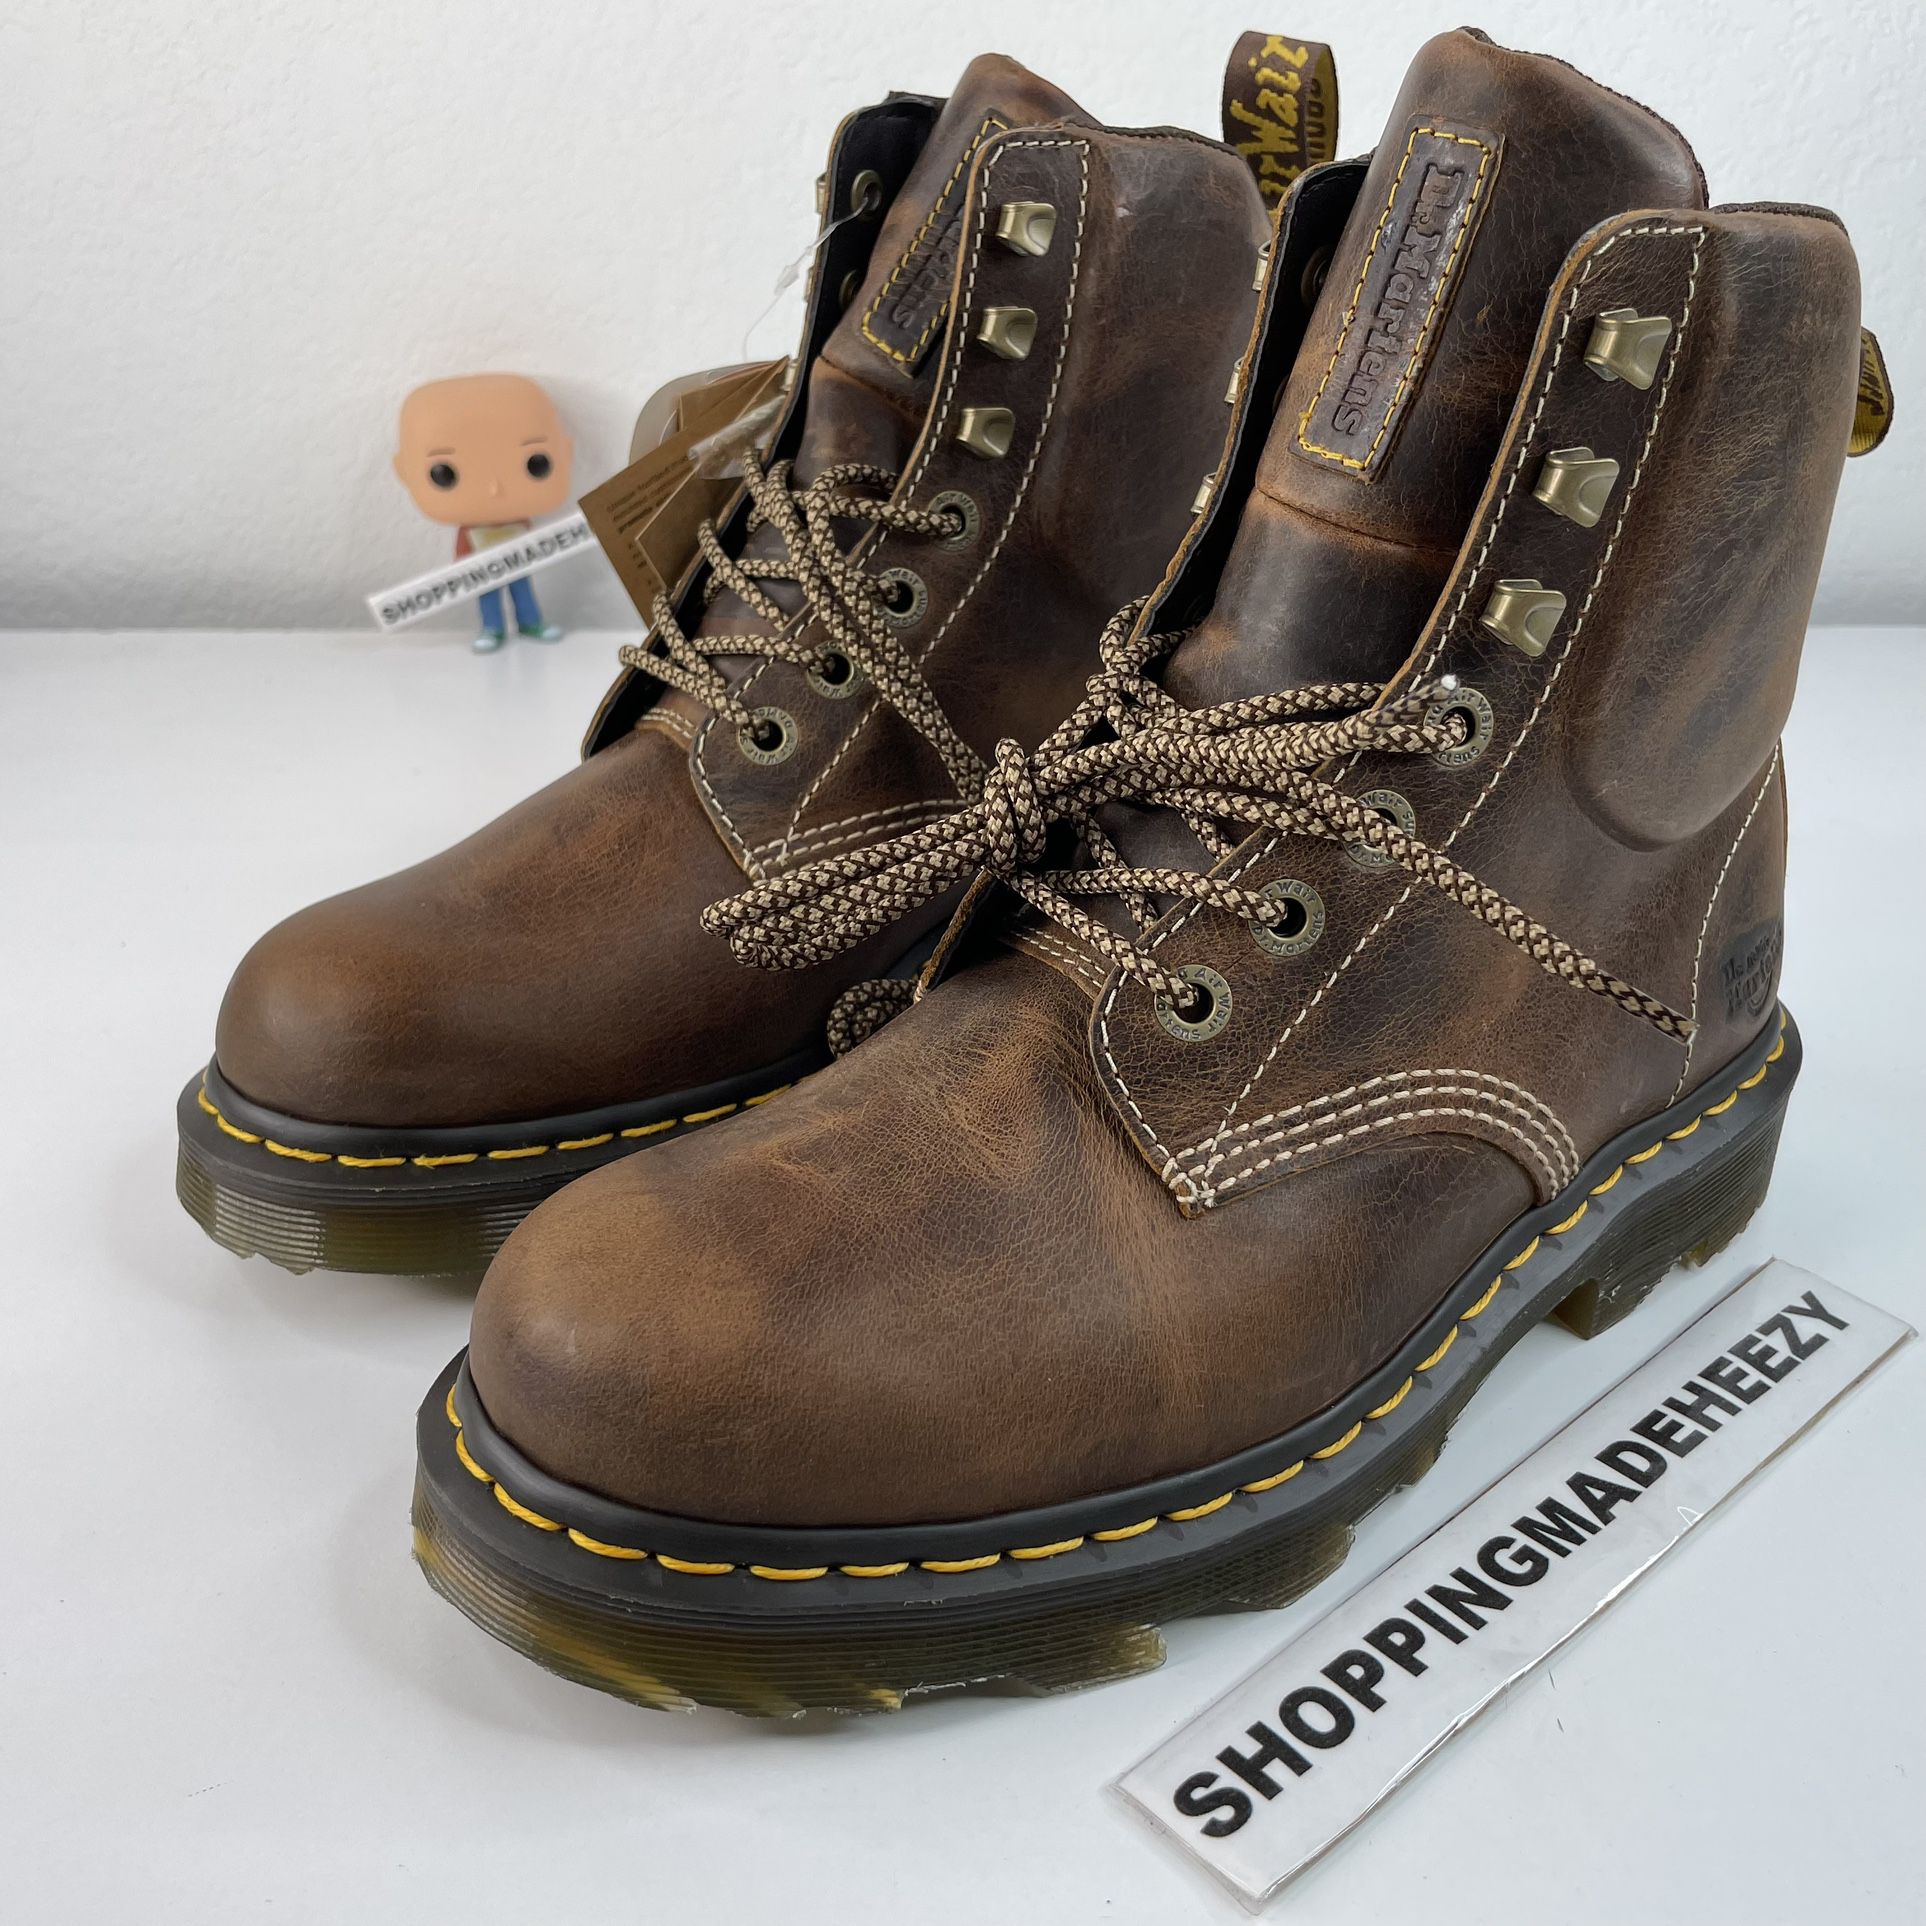 [US 8] Dr. Martens Lightweight Work Boots Crofton Heritage Leather Ankle Boots